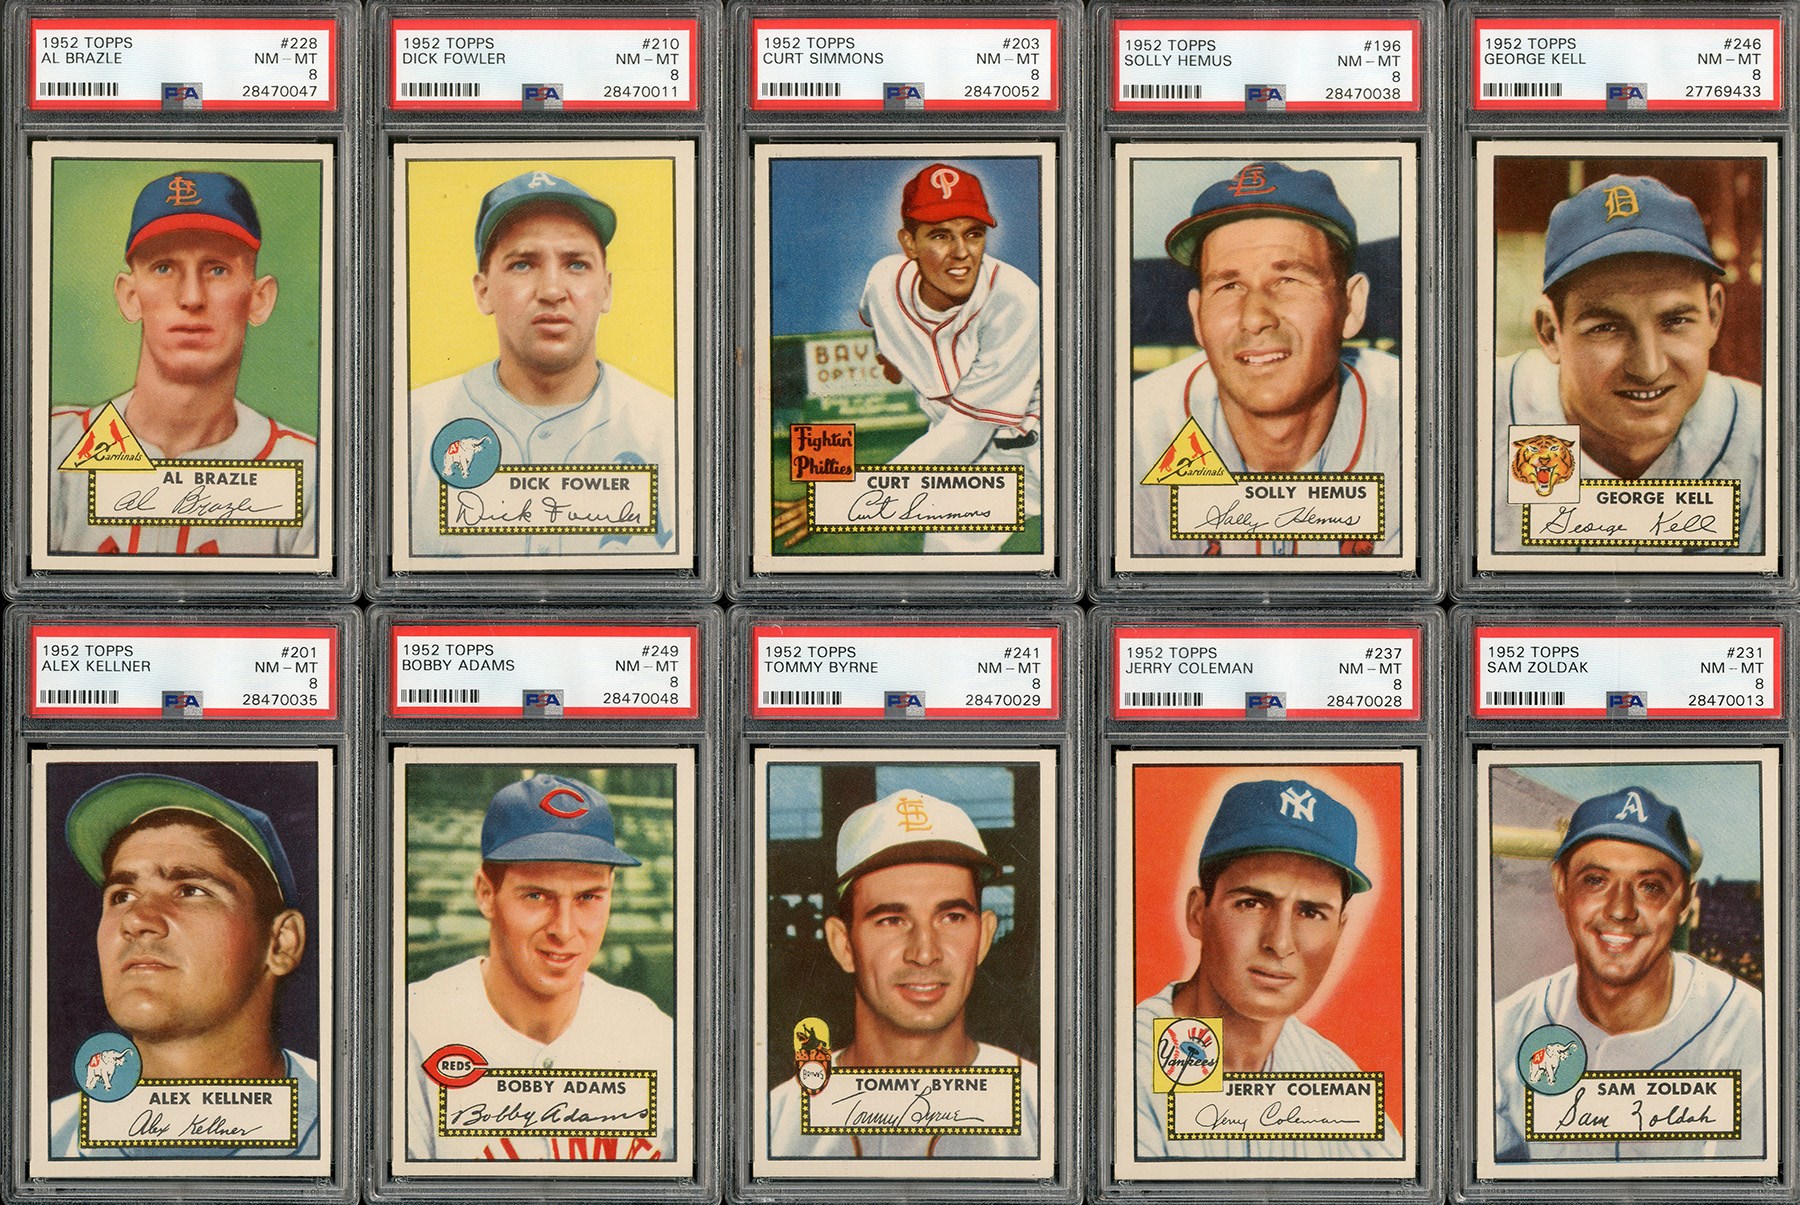 - 1952 Topps HIGH GRADE Collection of 12 Cards - All PSA Graded NM-MT 8!